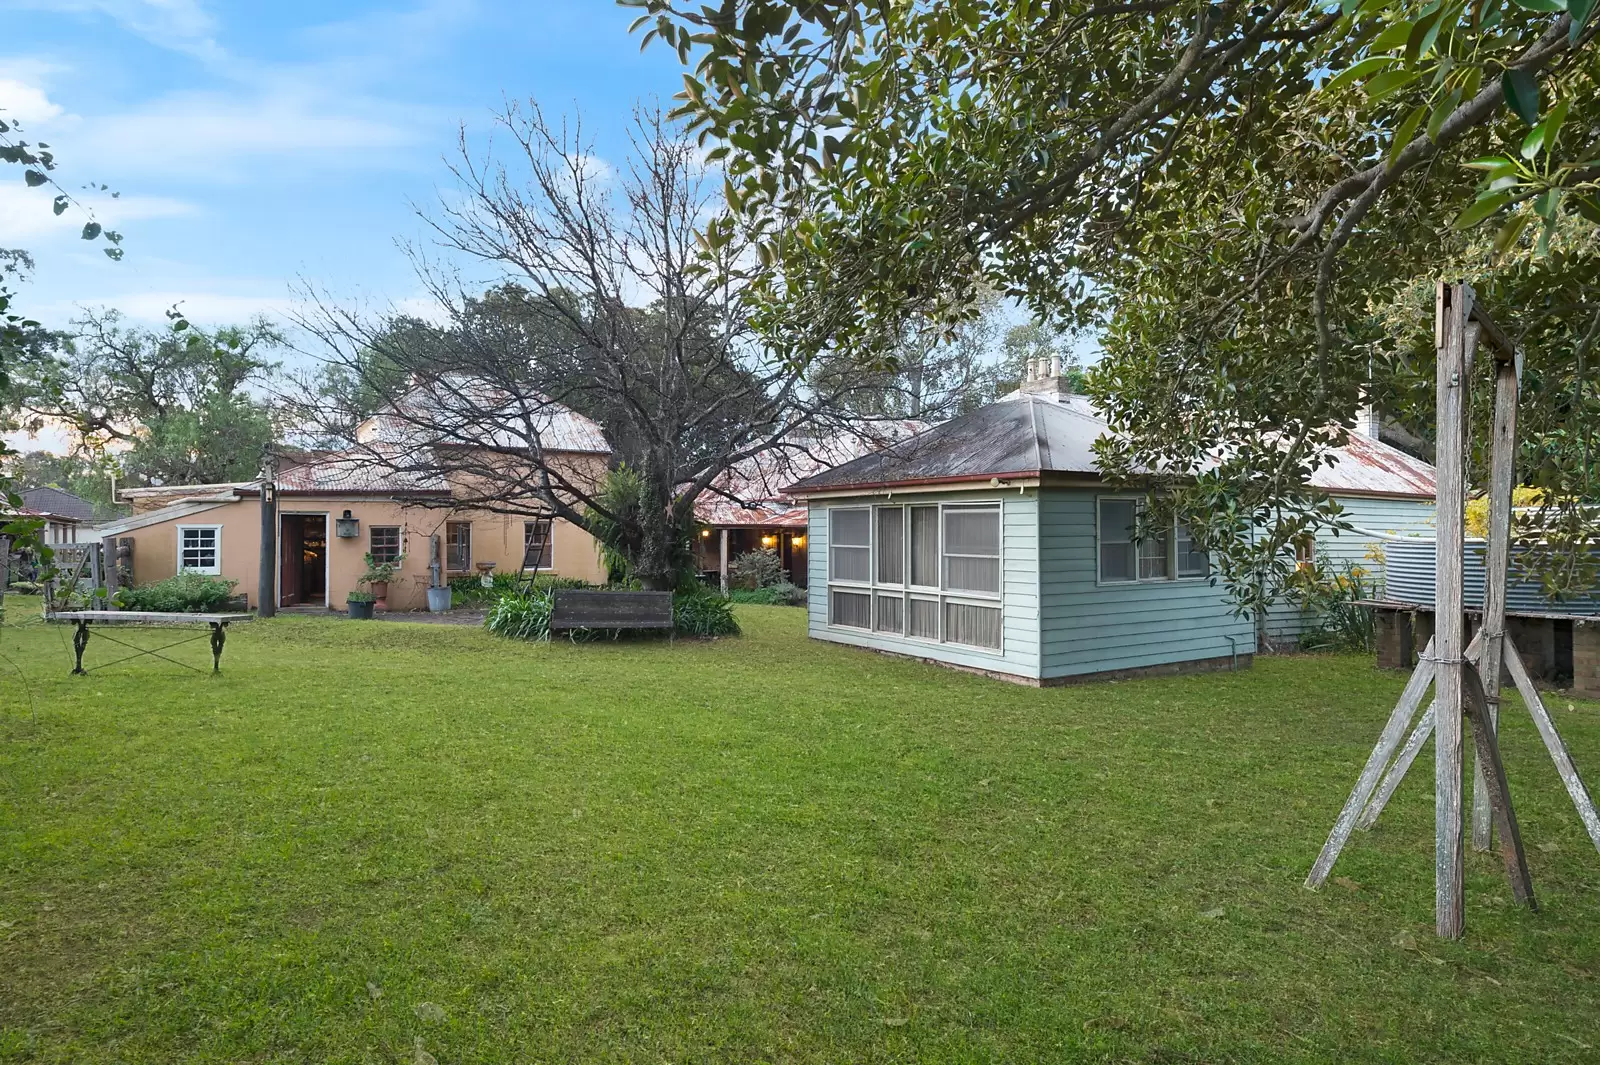 Photo #13: 1 Eire Way, Kellyville Ridge - For Sale by Sydney Sotheby's International Realty